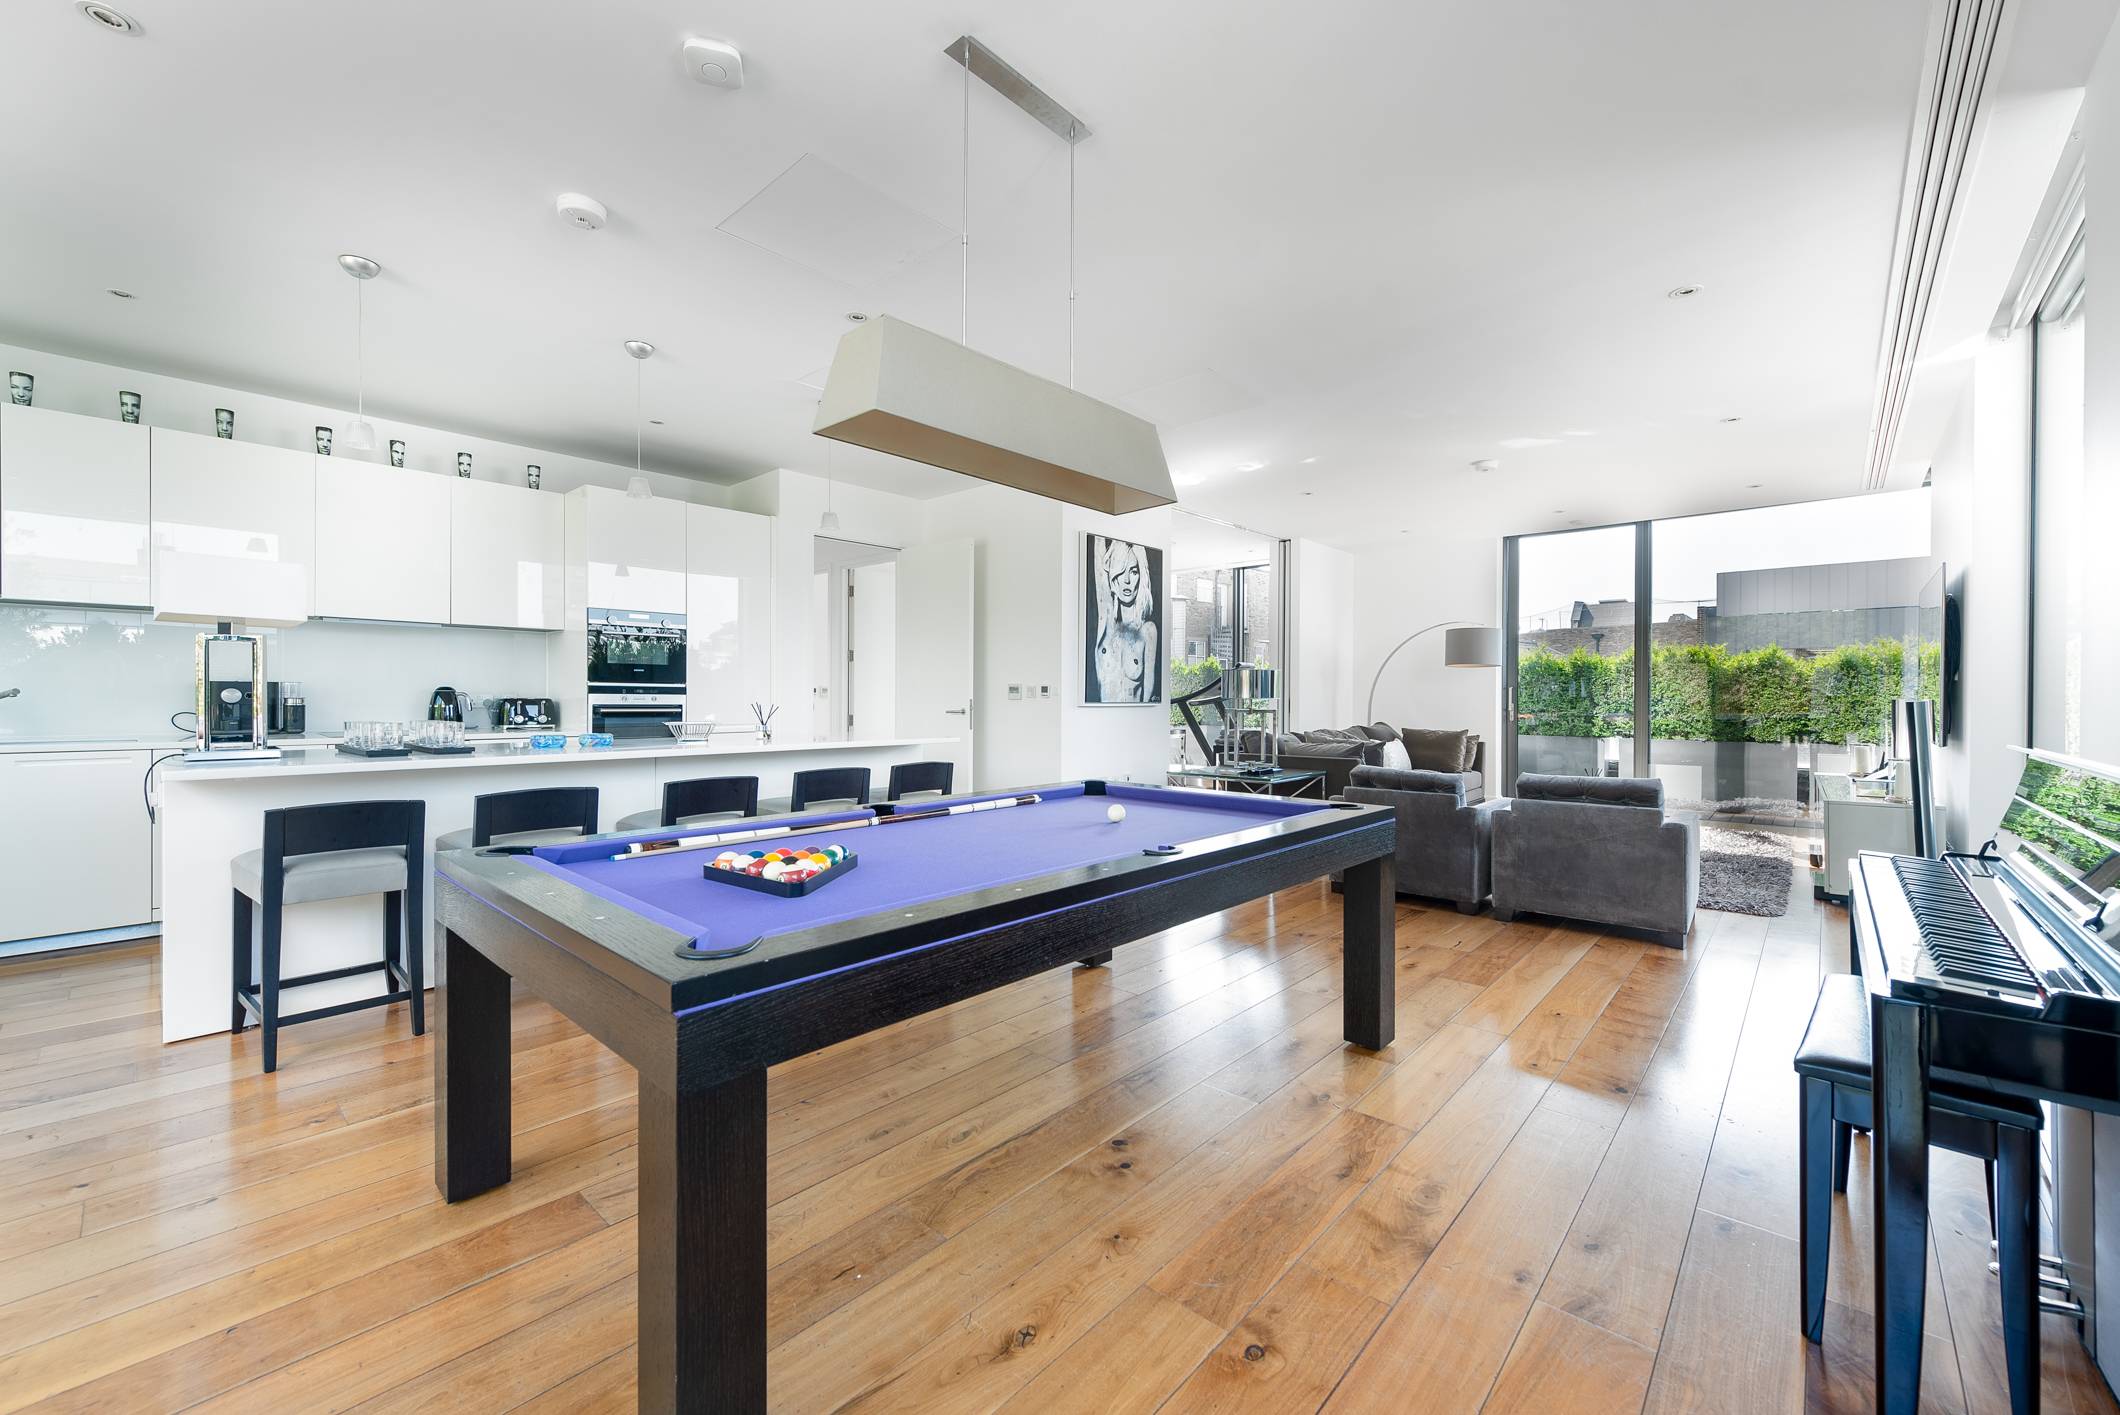 An immaculate penthouse situated within a modern development in the heart of Soho. The property offers high-end living across the top floor of one of Soho's most desired apartment buildings.